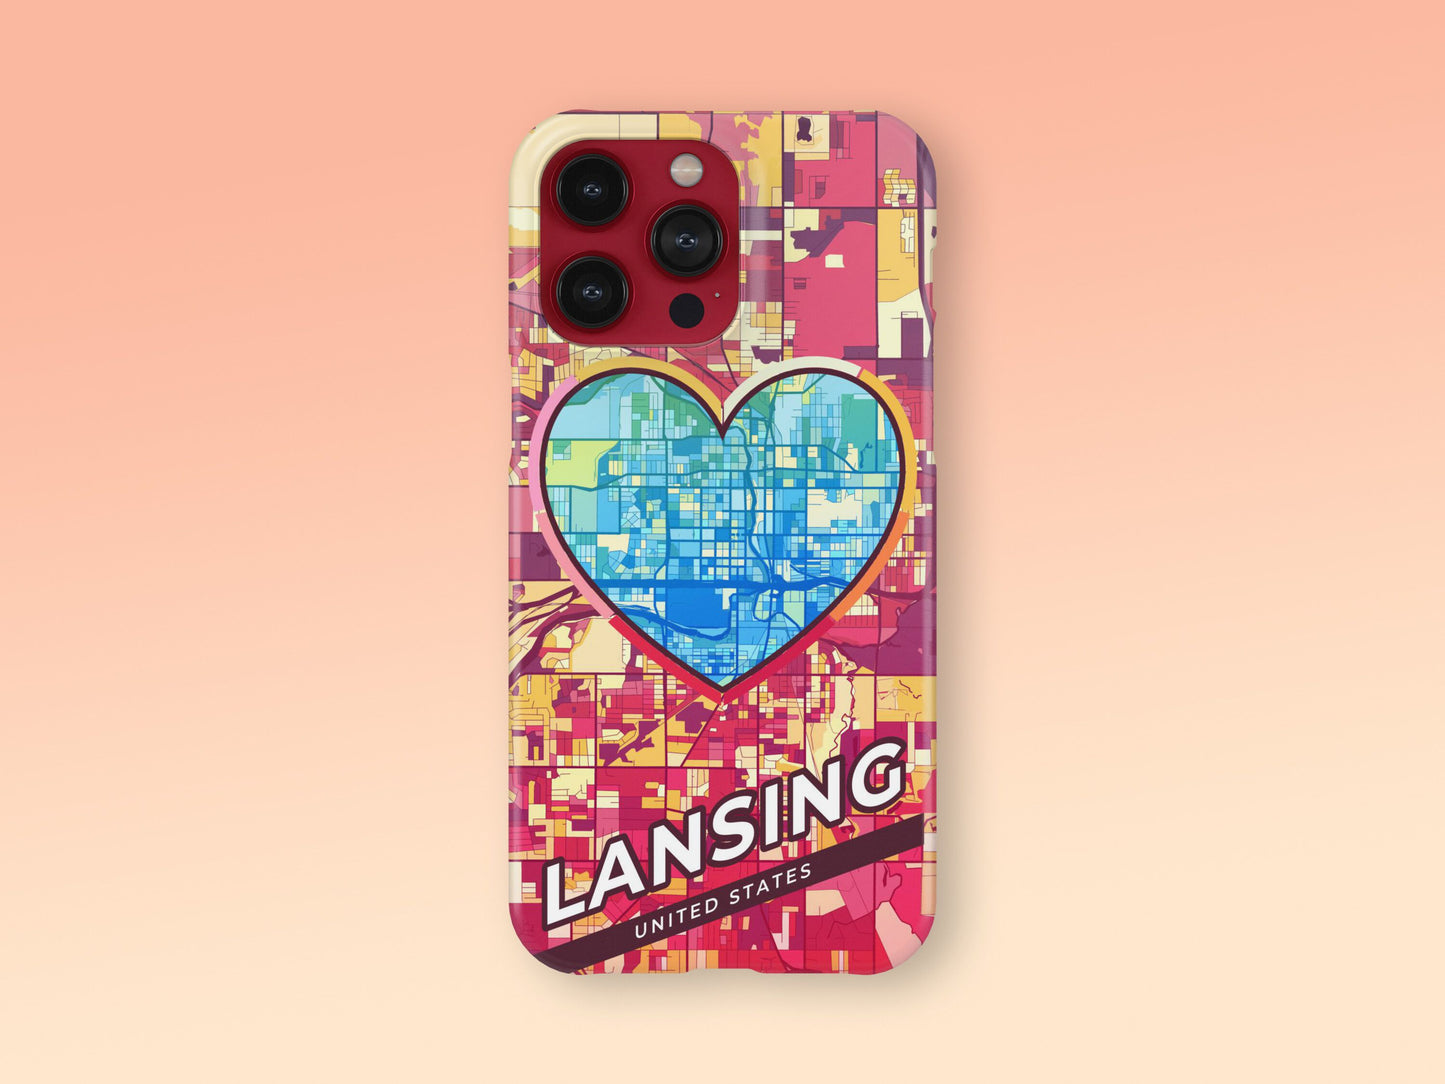 Lansing Michigan slim phone case with colorful icon. Birthday, wedding or housewarming gift. Couple match cases. 2